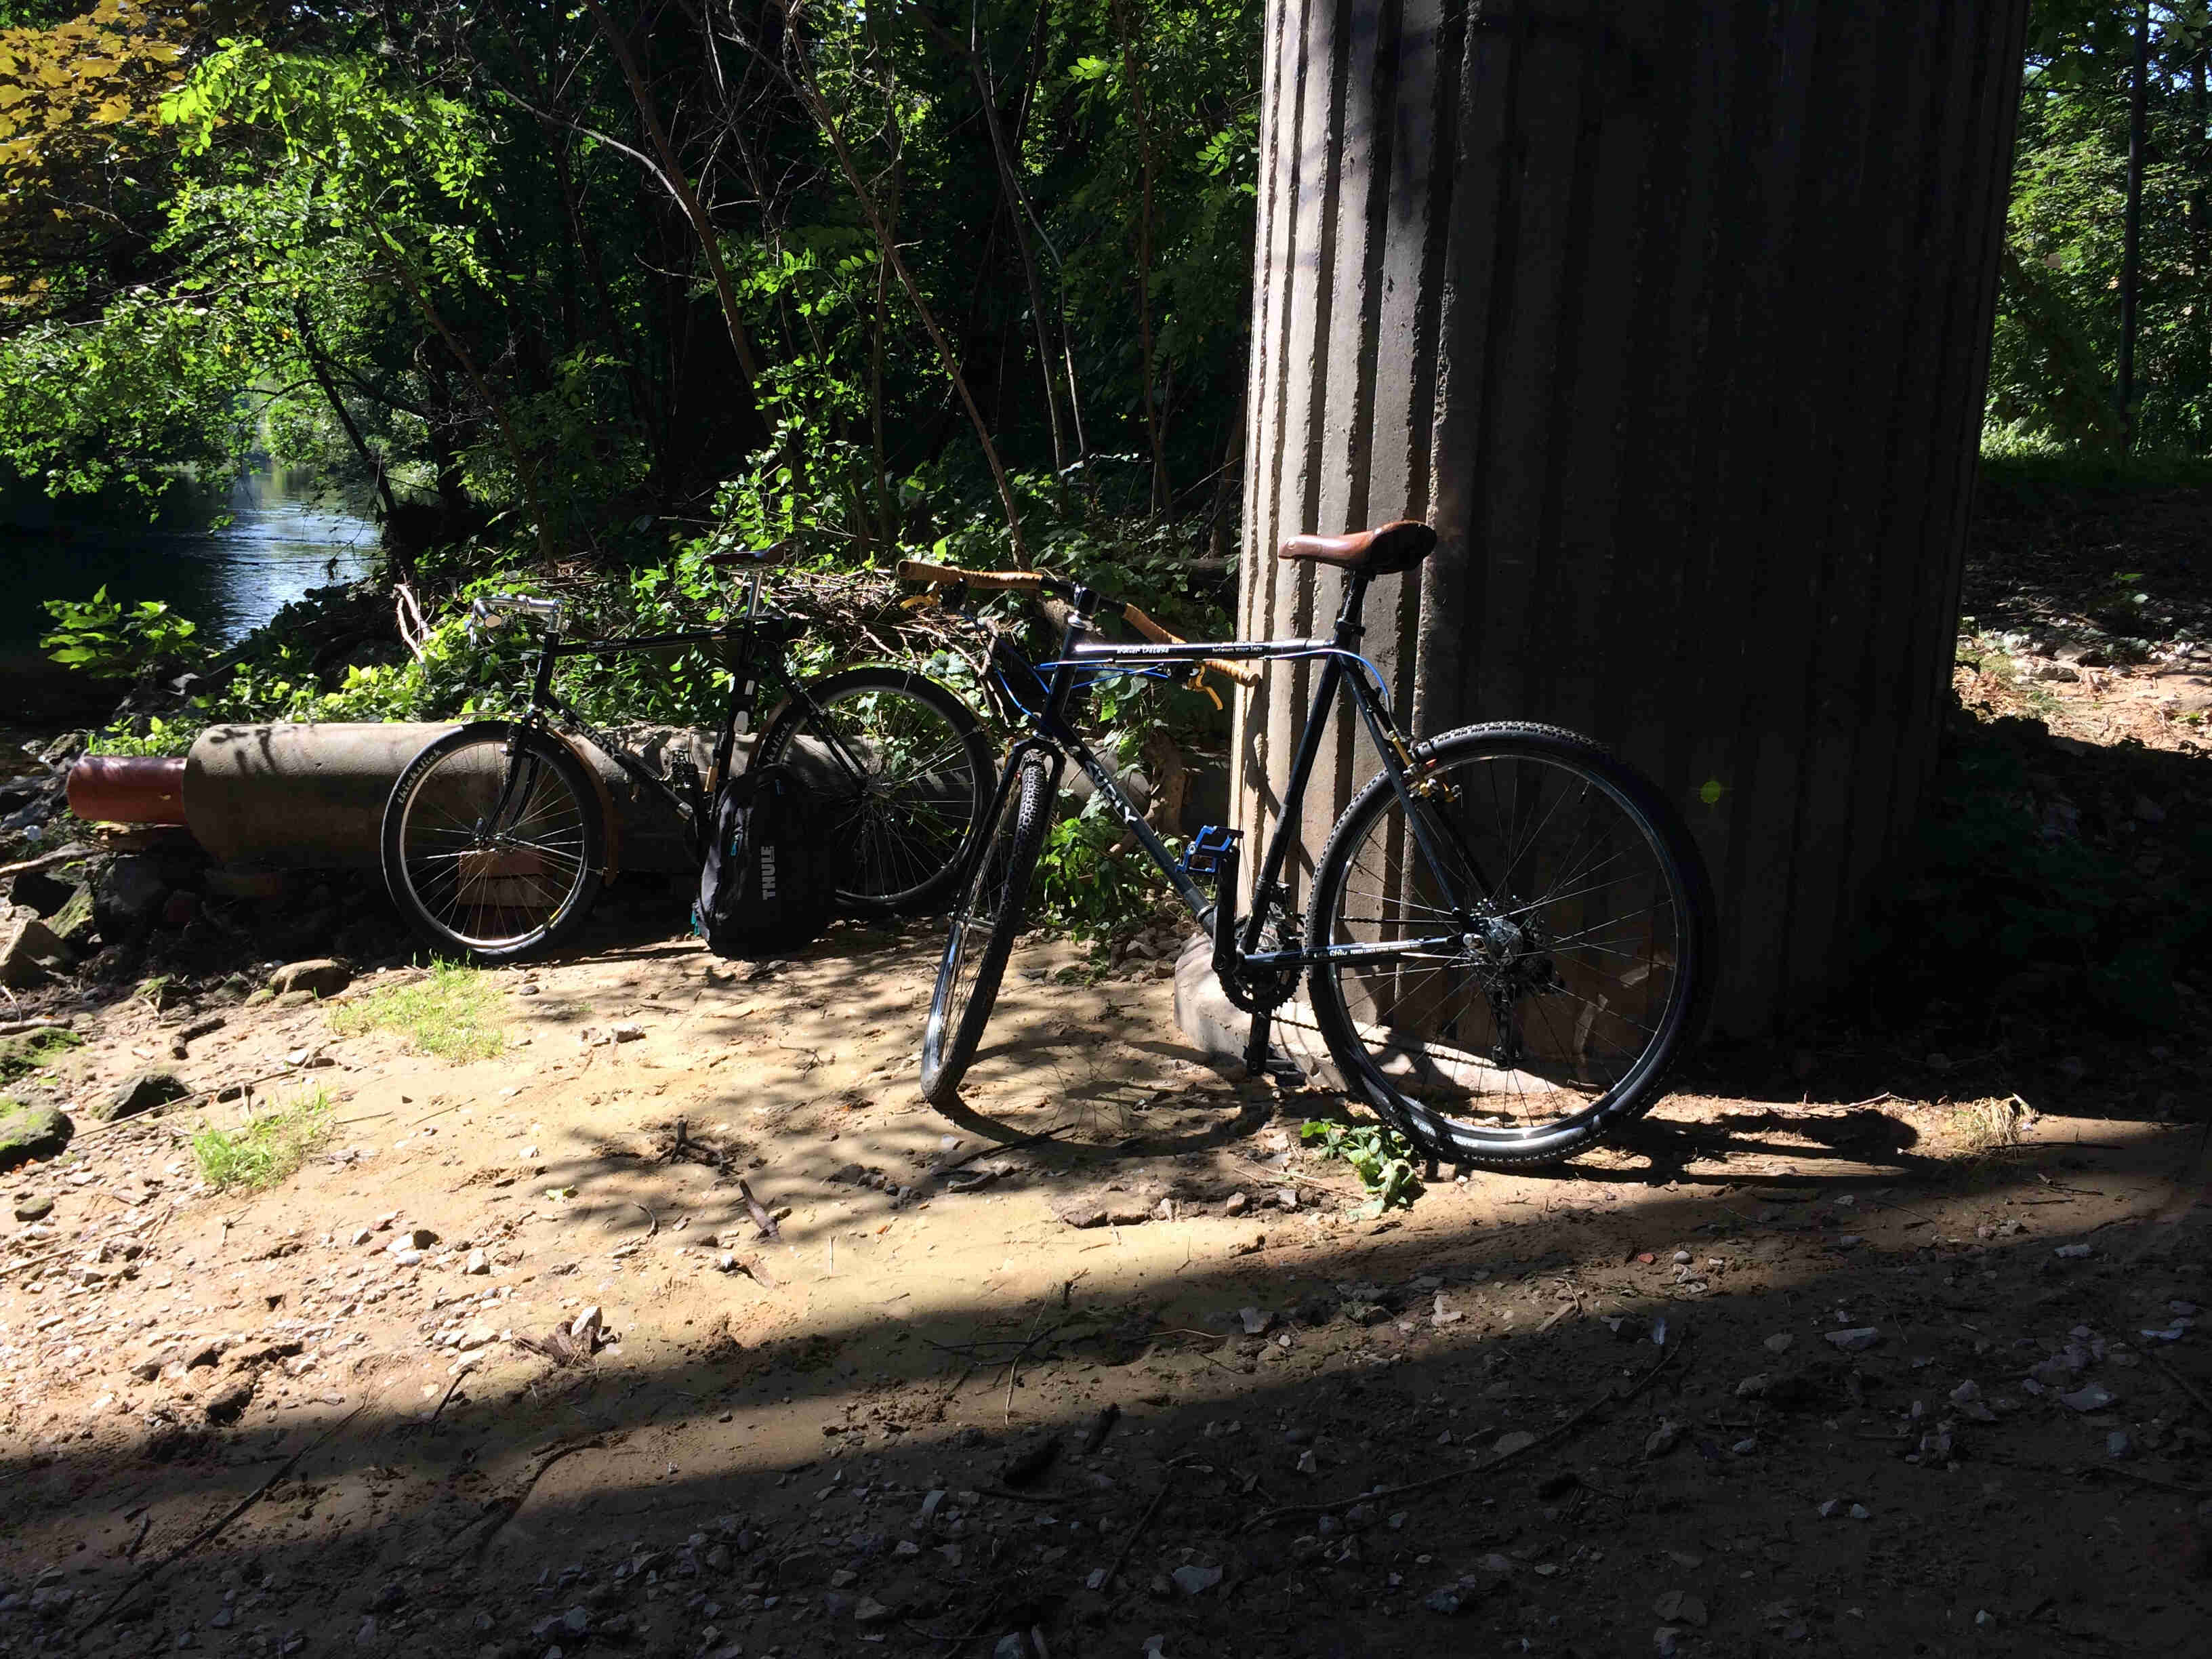 Right side view of 2 Surly bikes, parked on a flat dirt bank near a river in the woods, next to a bridge pillar